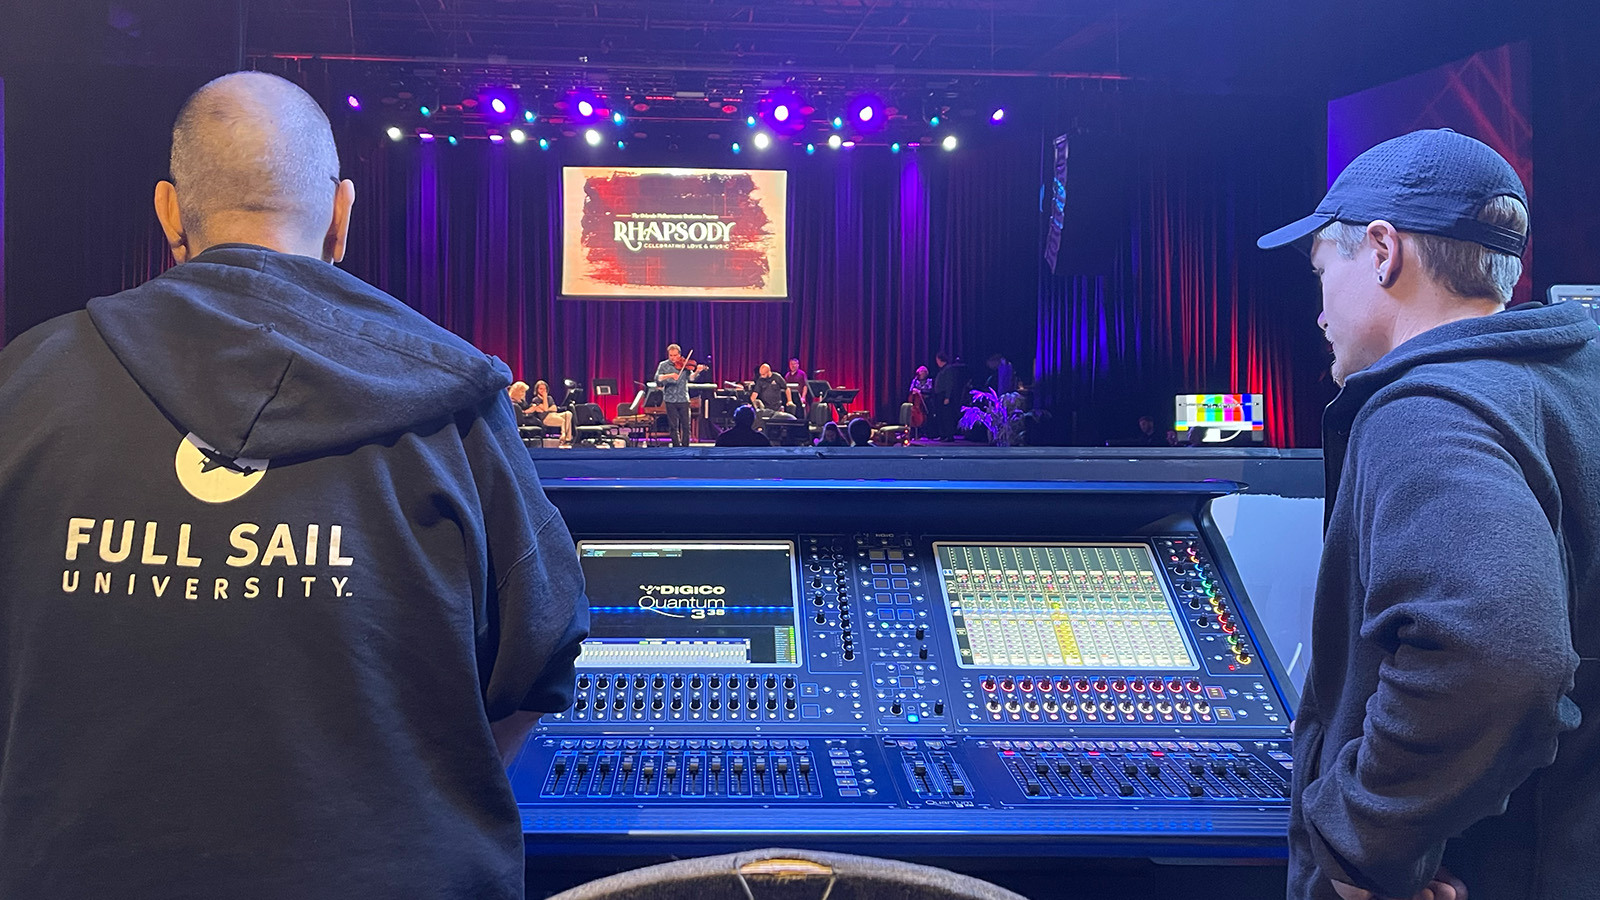 Two people's backs are facing the camera as they overlook an audio console and stage at The Plaza Live.